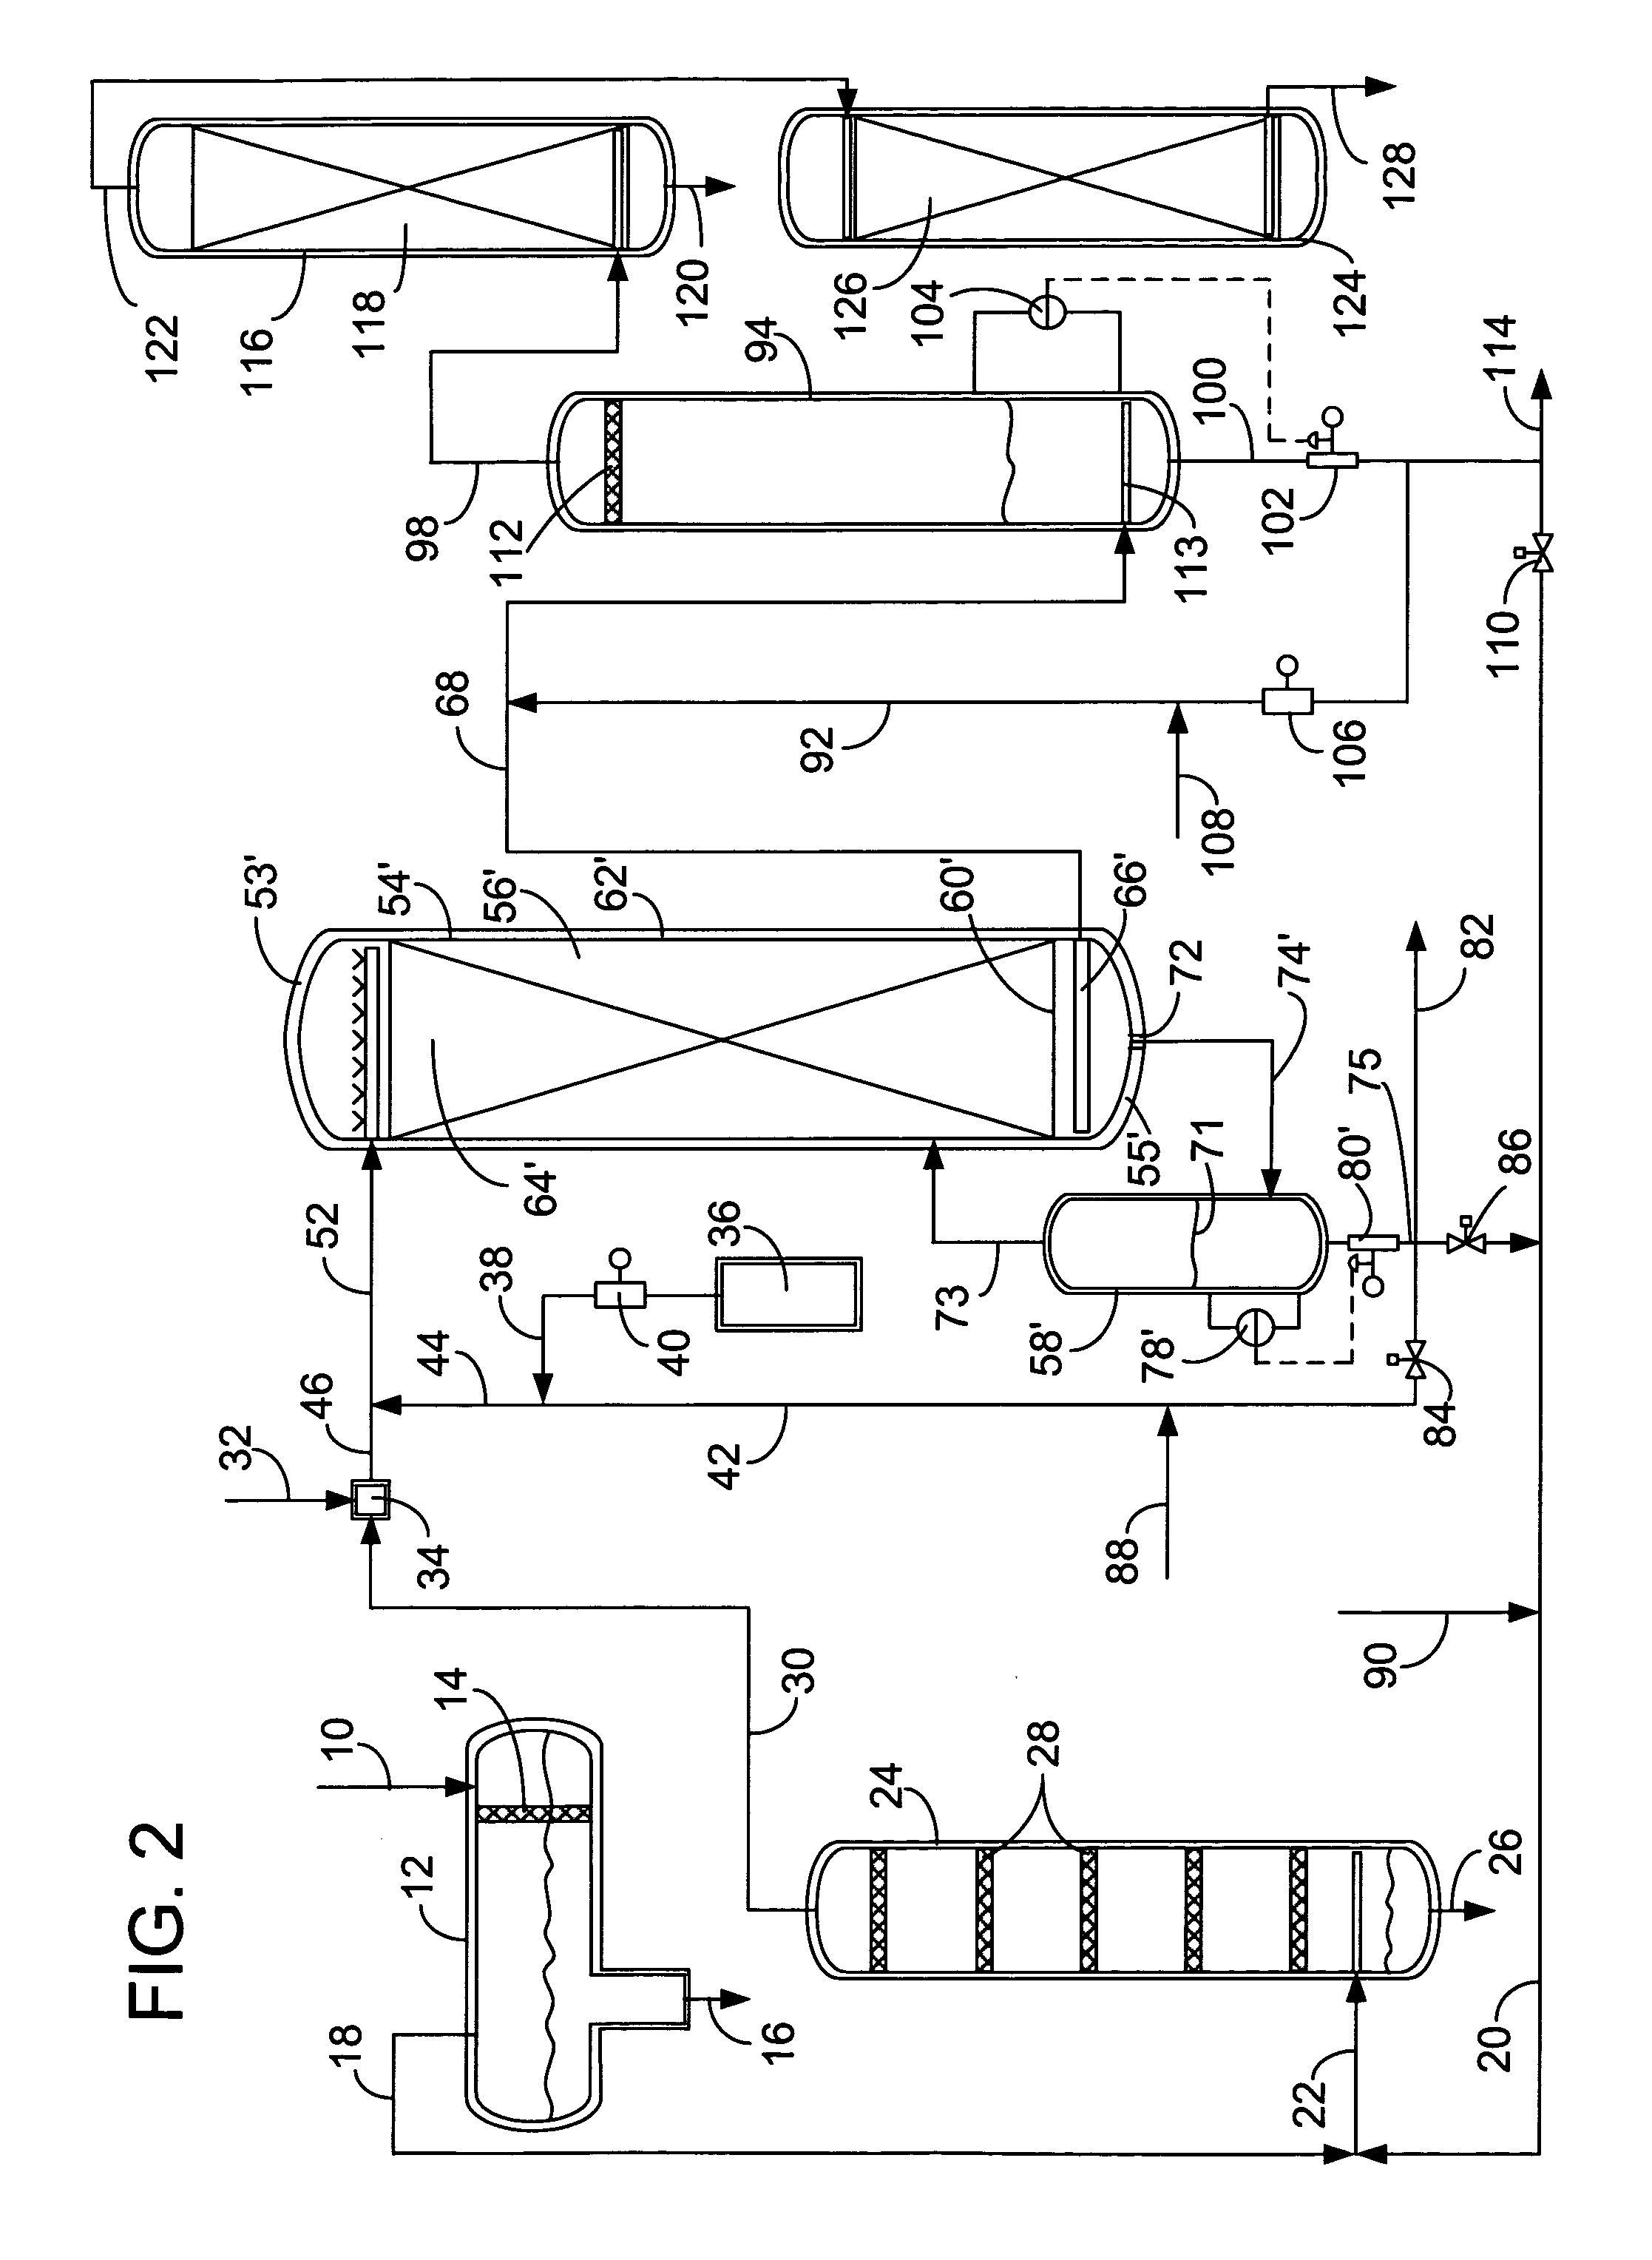 Reactor and process for mercaptan oxidation and separation in the same vessel